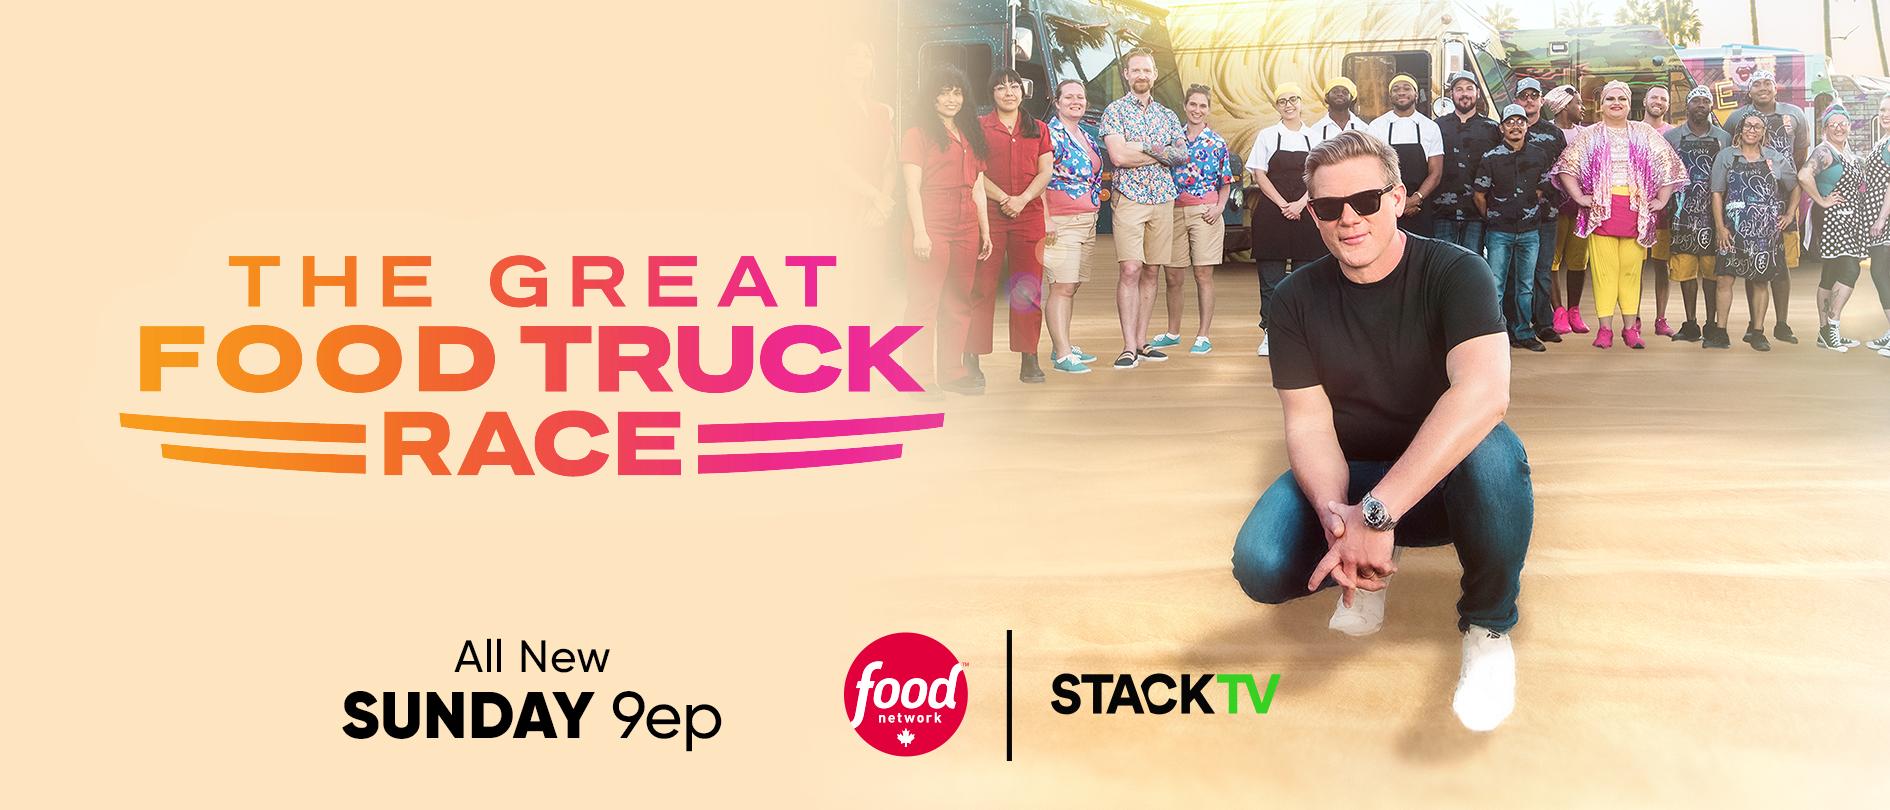 The Great Food Truck Race